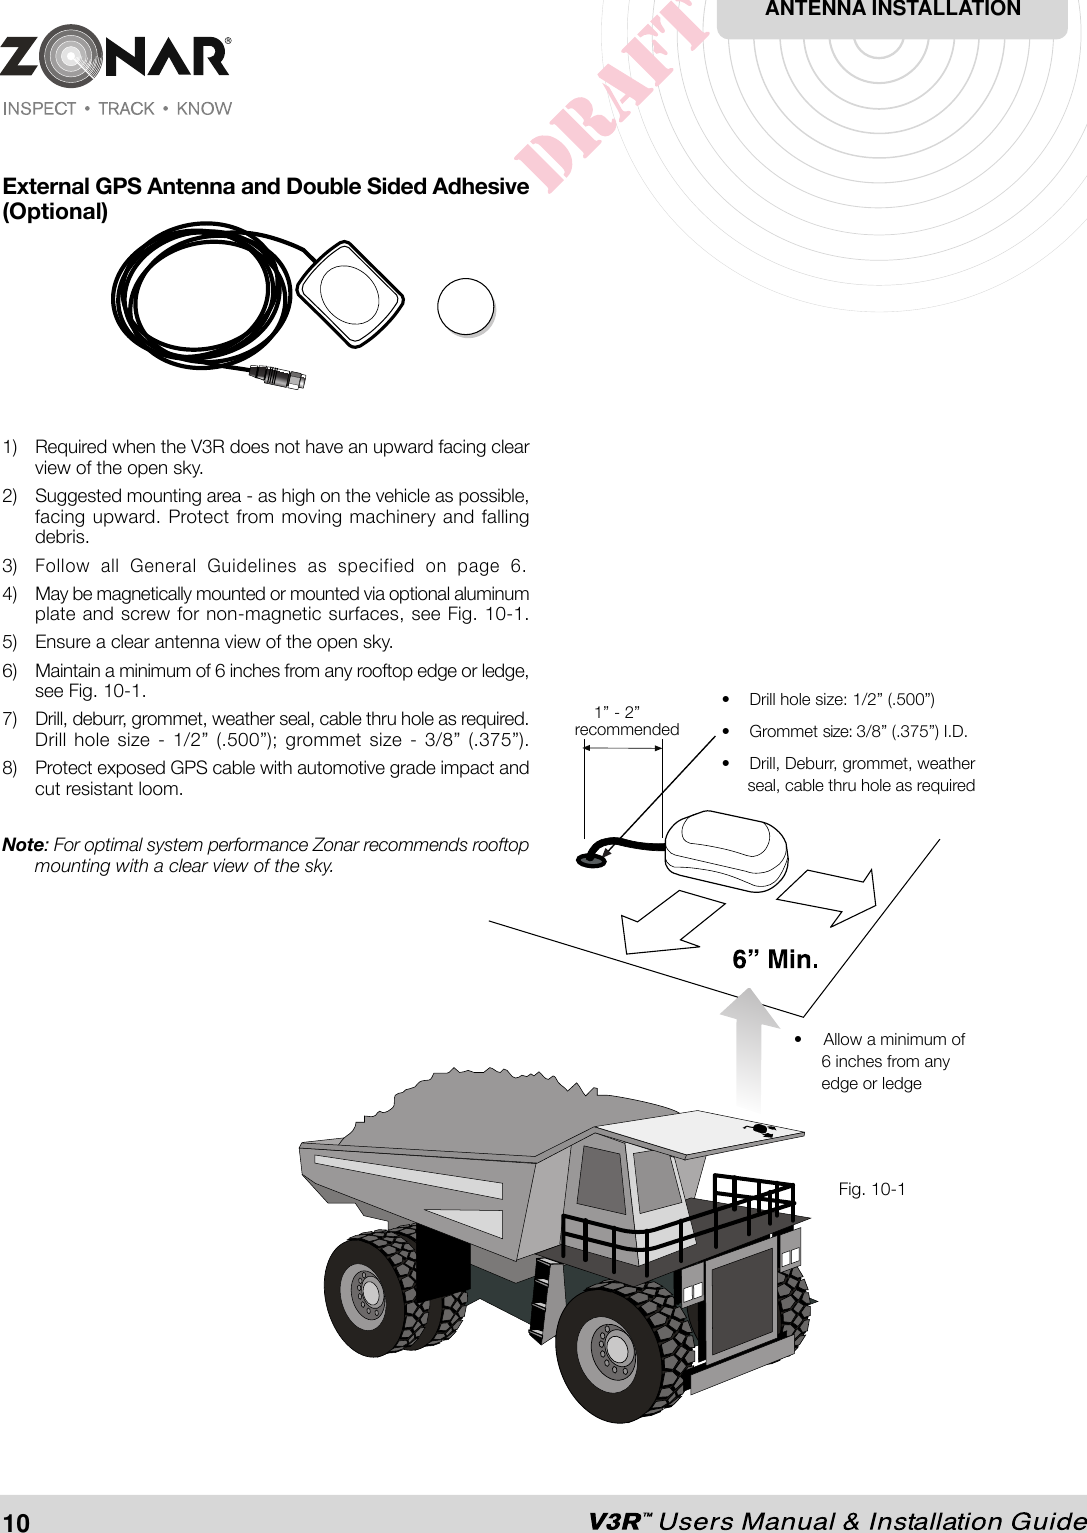 External GPS Antenna and Double Sided Adhesive(Optional)1) Required when the V3R does not have an upward facing clearview of the open sky.2) Suggested mounting area - as high on the vehicle as possible,facing upward. Protect from moving machinery and fallingdebris.3)Follow all General Guidelines as specified on page 6.4) May be magnetically mounted or mounted via optional aluminumplate and screw for non-magnetic surfaces, see Fig. 10-1.5) Ensure a clear antenna view of the open sky.6) Maintain a minimum of 6 inches from any rooftop edge or ledge,see Fig. 10-1.7) Drill, deburr, grommet, weather seal, cable thru hole as required.Drill hole size - 1/2” (.500”); grommet size - 3/8” (.375”).8) Protect exposed GPS cable with automotive grade impact andcut resistant loom.Note: For optimal system performance Zonar recommends rooftopmounting with a clear view of the sky.Fig. 10-2ANTENNA INSTALLATION10• Allow a minimum of6 inches from anyedge or ledge• Drill hole size: 1/2” (.500”)• Grommet size: 3/8” (.375”) I.D.• Drill, Deburr, grommet, weatherseal, cable thru hole as required1” - 2”recommendedFig. 10-1